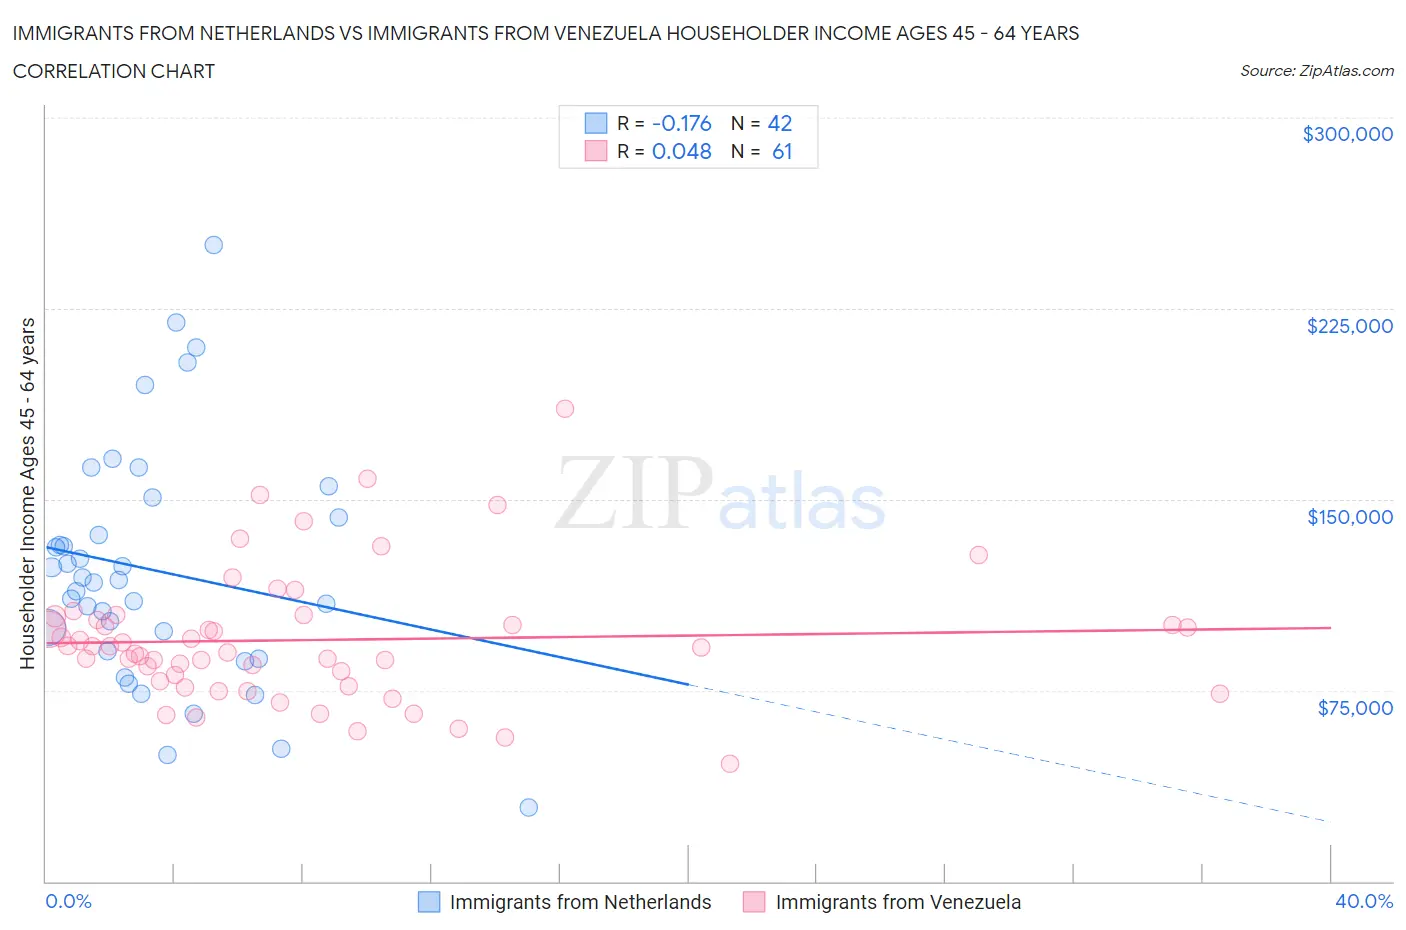 Immigrants from Netherlands vs Immigrants from Venezuela Householder Income Ages 45 - 64 years